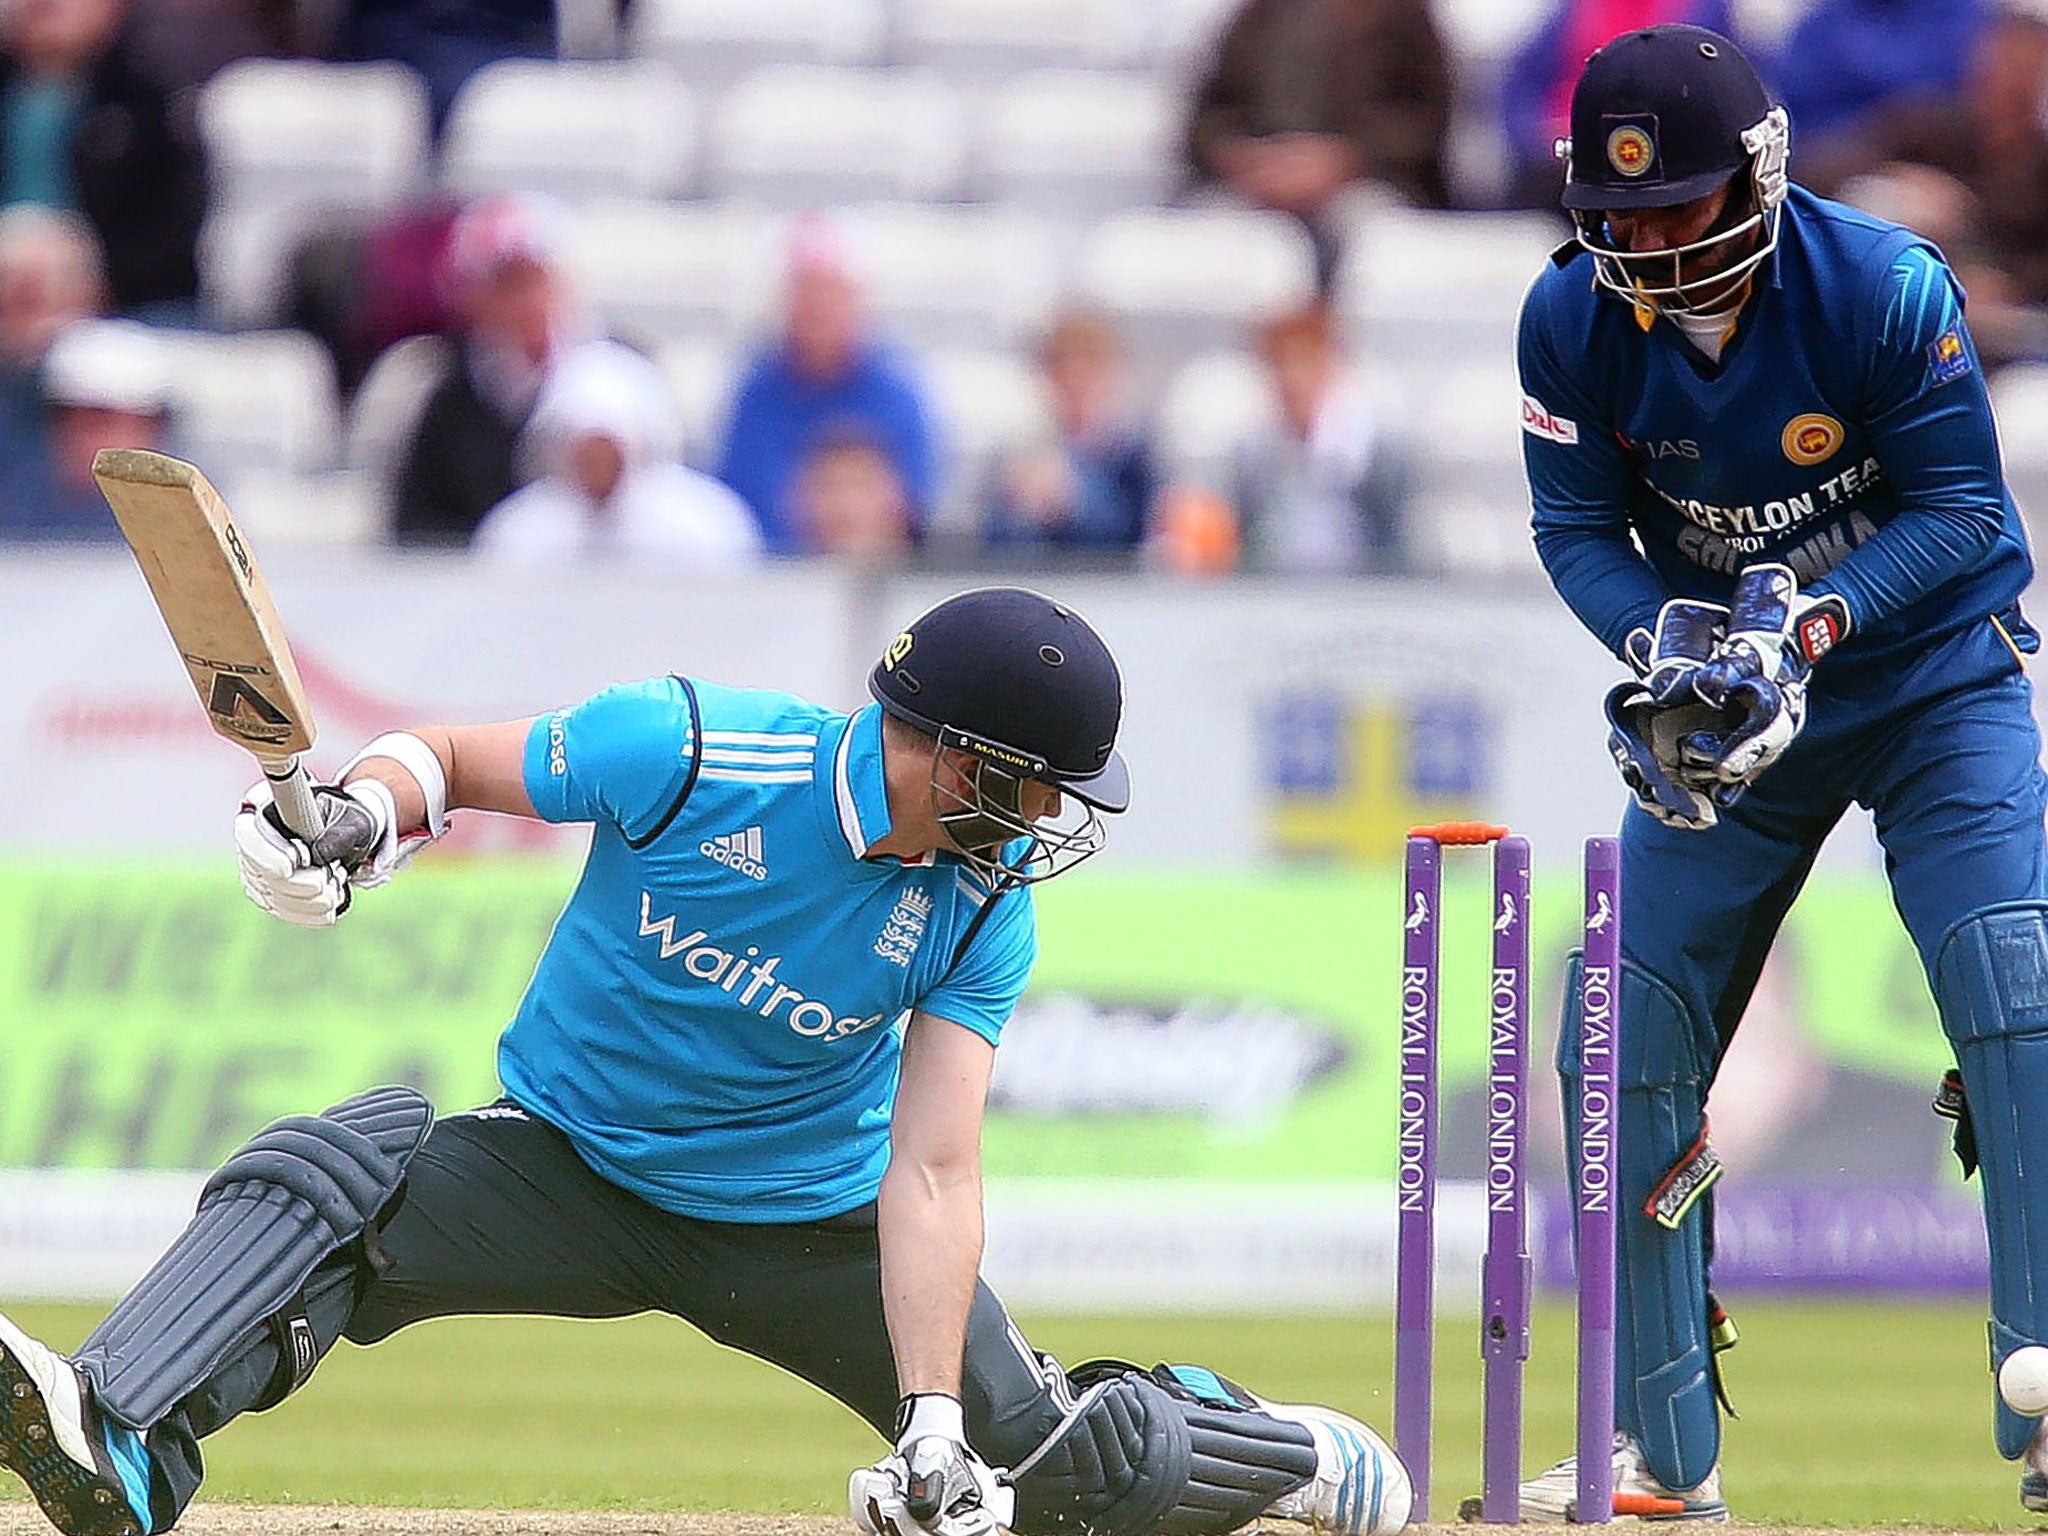 James Anderson is bowled by Sachithra Senanayake and England are all out for 99